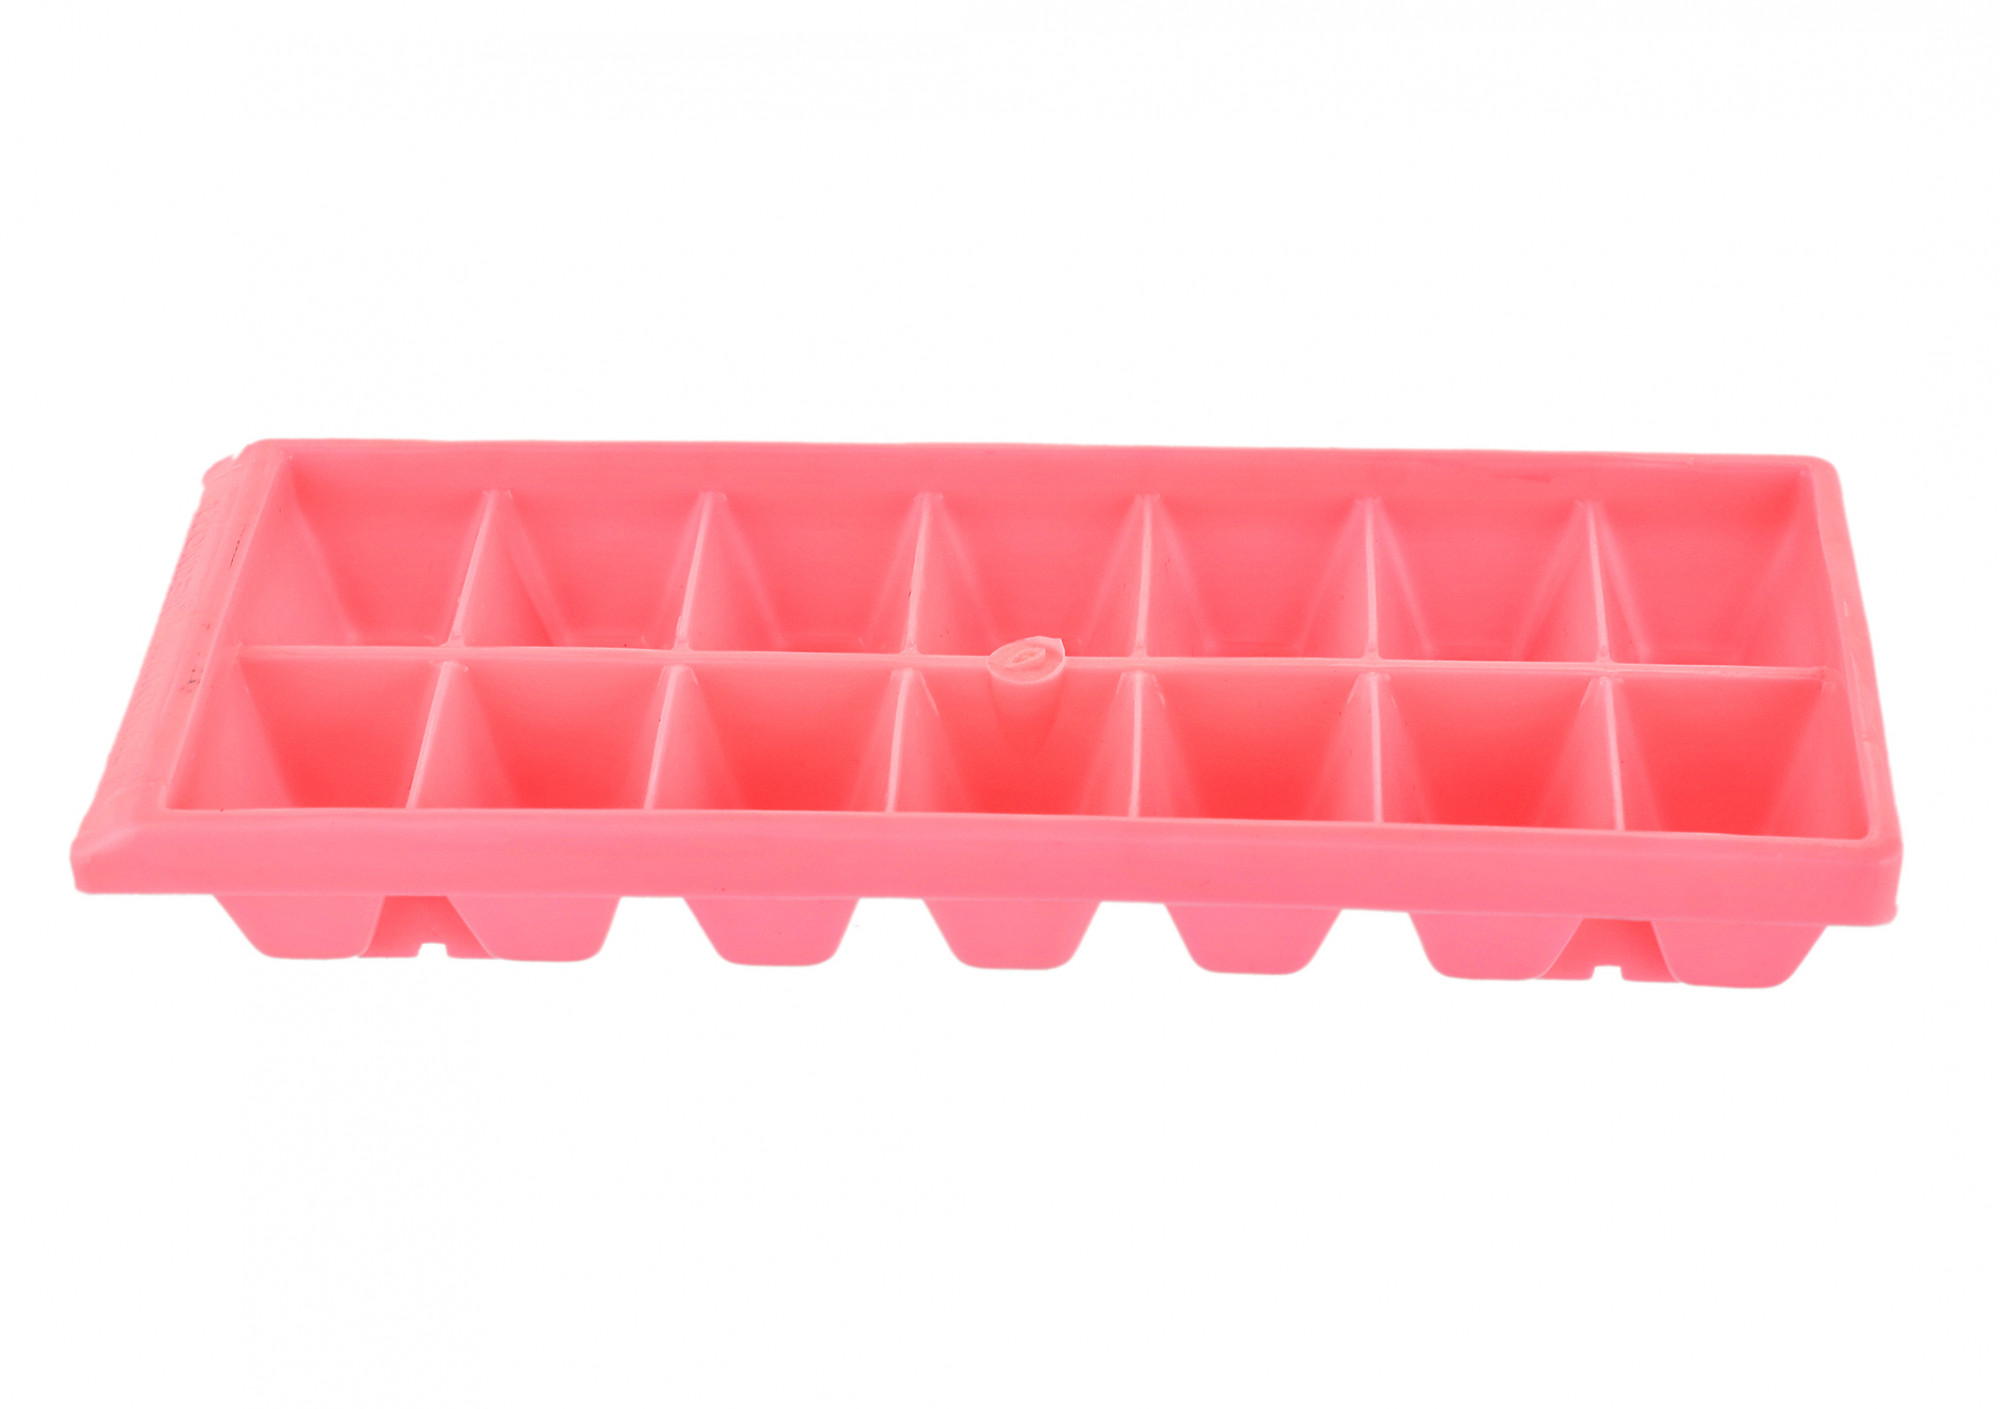 Kuber Industries Plastic Ice Cube Tray Set With 14 Section- Pack of 9 (Green & Pink & Blue)-HS43KUBMART25805